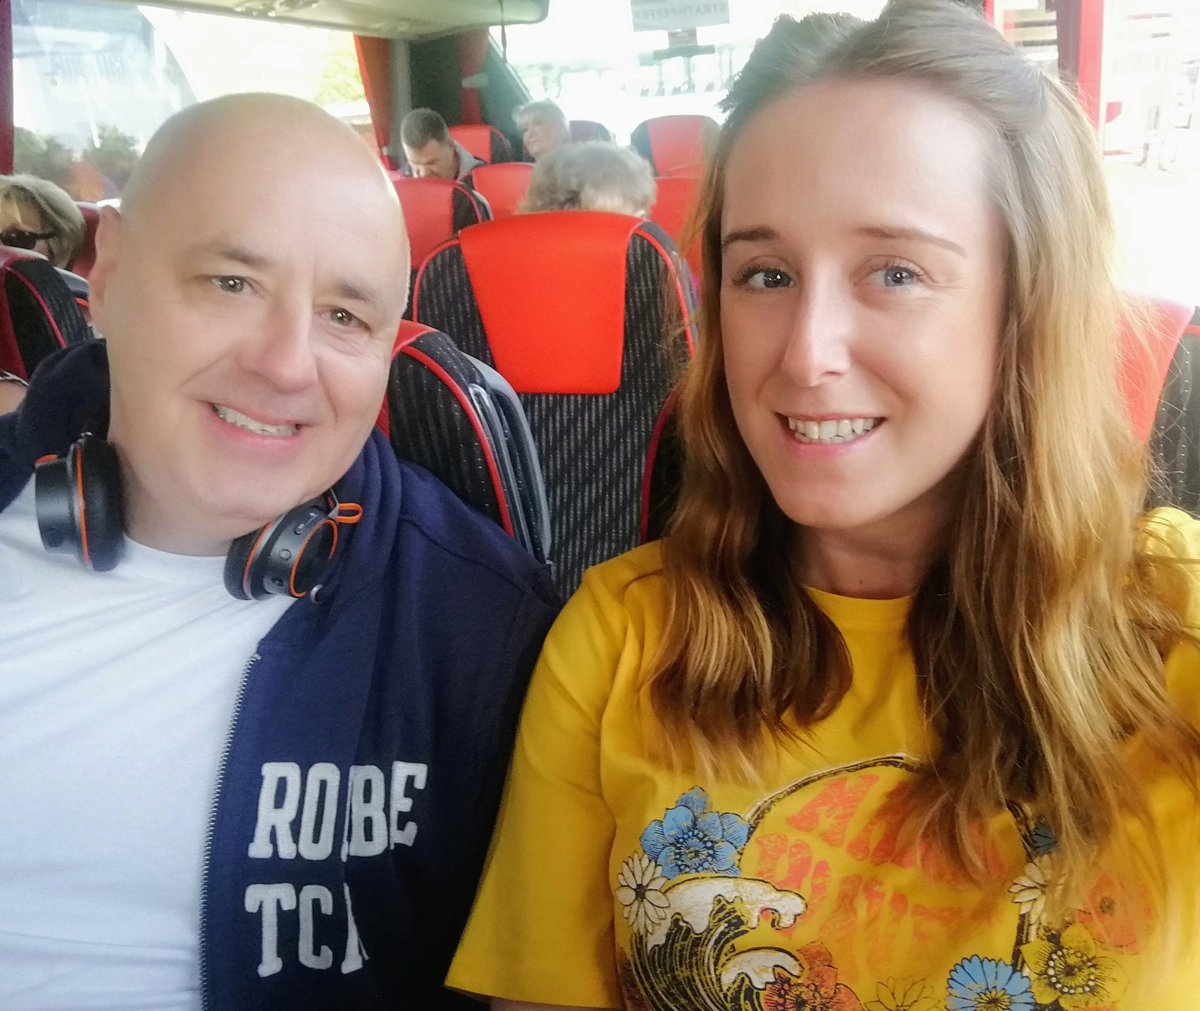 #AD When I get to bring my loved ones to work 💙 I'm off for a weekend of bonding with my Dad in the Highlands on our own Scottish version of TV's Coach Trip with @CaledonianTrav 🚌 Excited for our 'Lunch on a Steam Train' 🚂 #Scotland #family